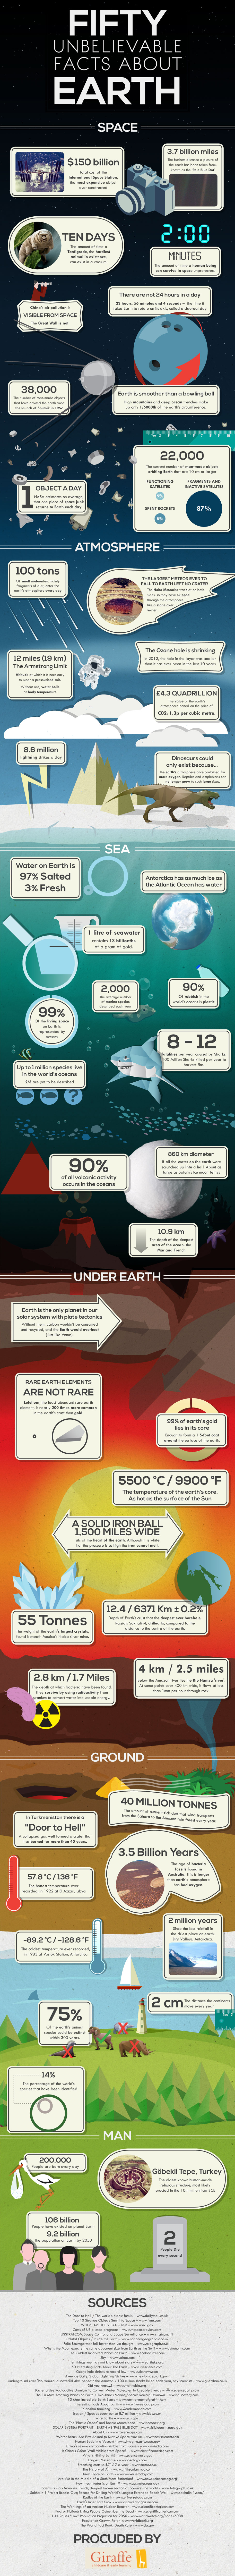 50 Extraordinary Facts about Space and Earth Infographic